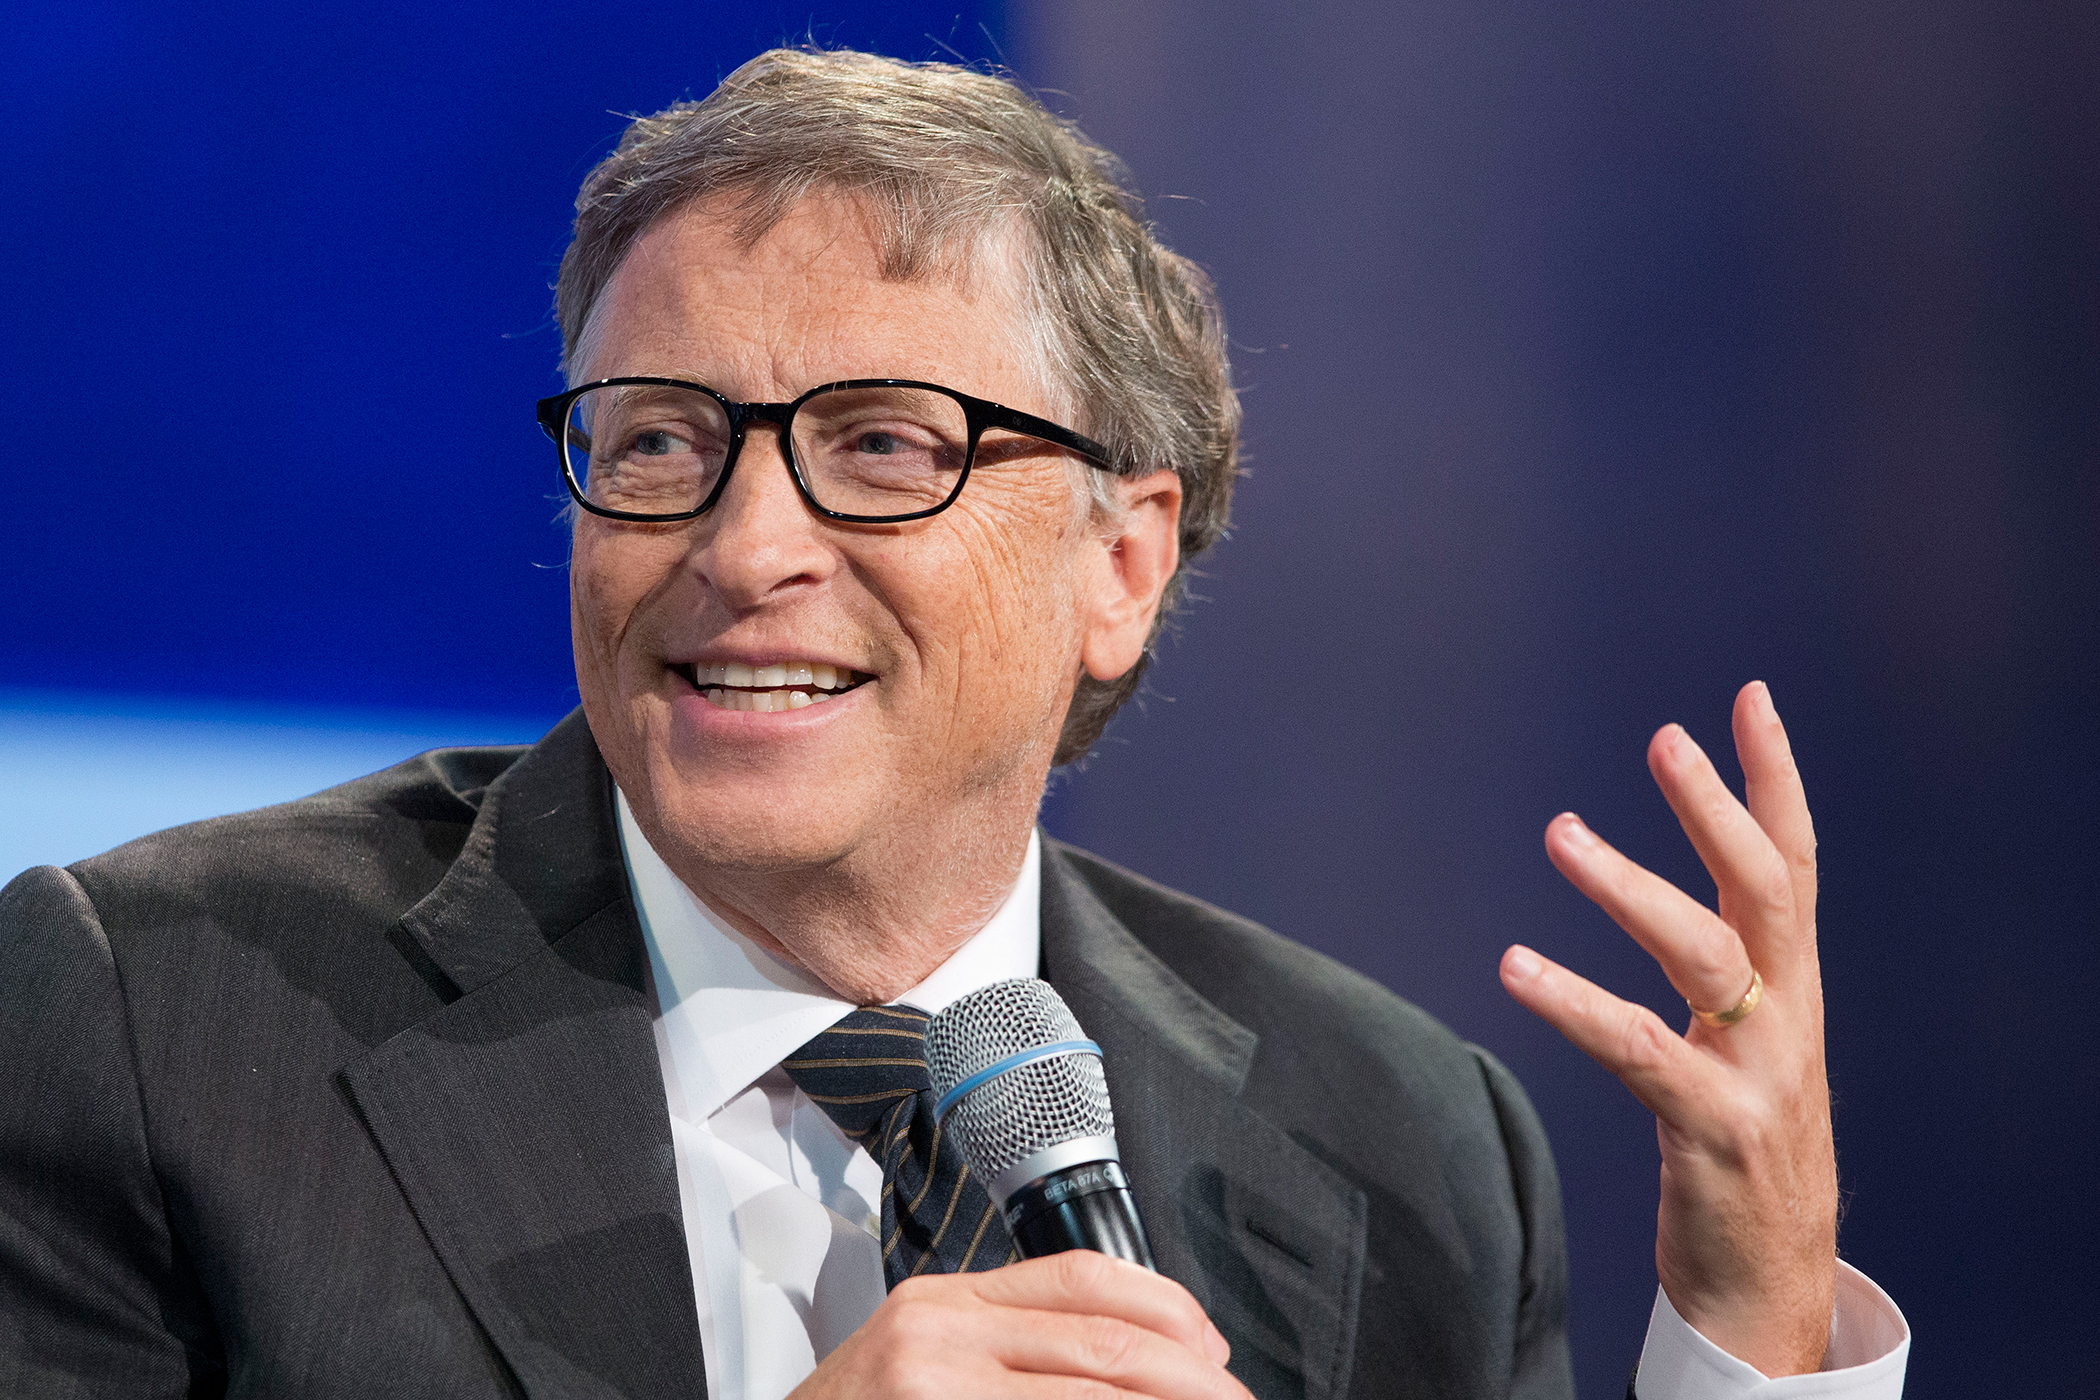 Bill Gates, philanthropist and co-founder of Microsoft, participates in a session titled "Investing in Prevention and Resilient Health Systems," September 27, 2015 at the Clinton Global Initiative in New York.